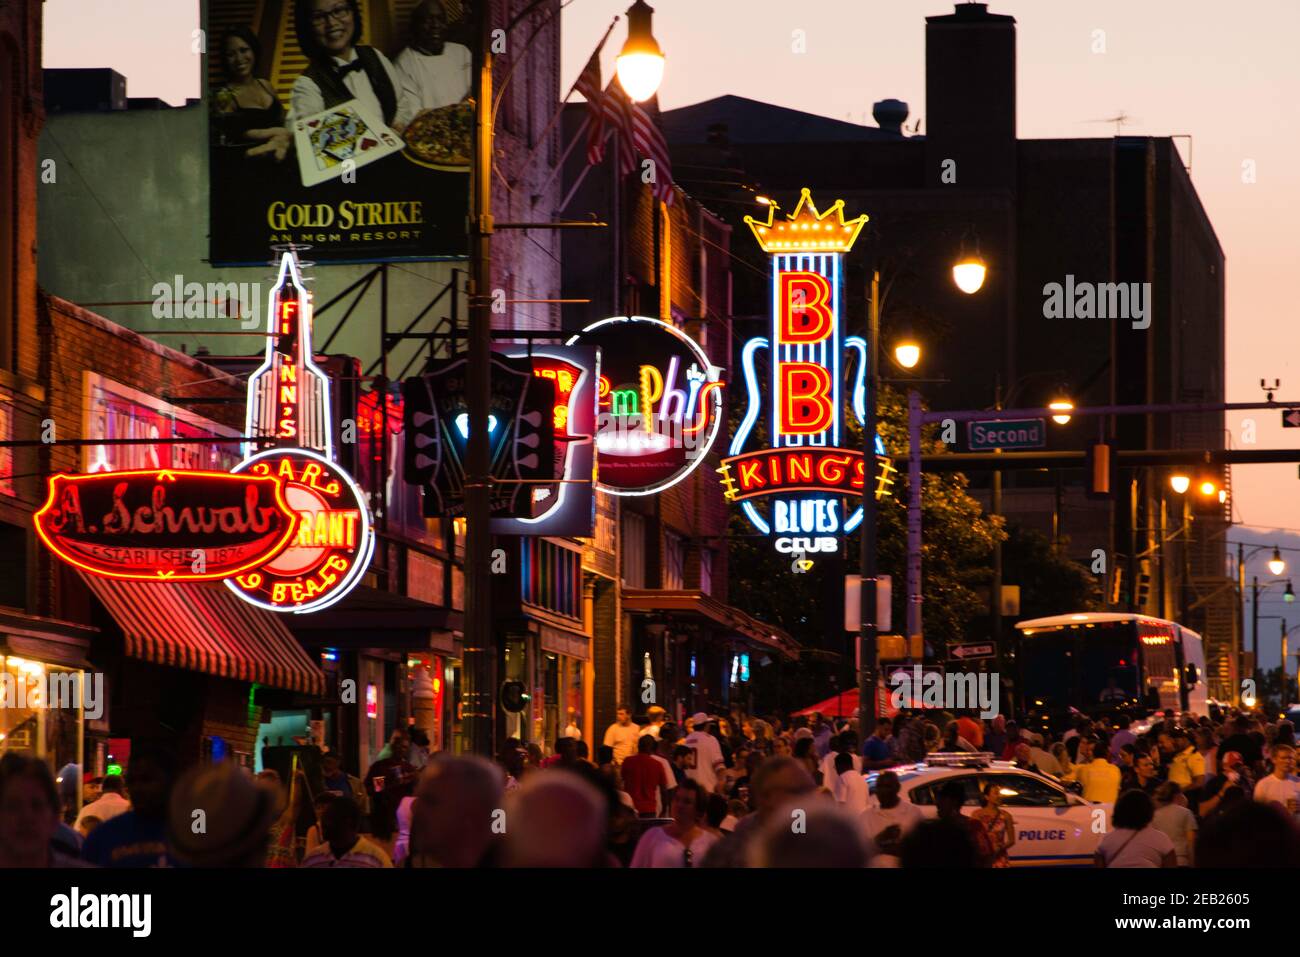 Crowd of people on Beale Street in Memphis, Tennessee looking toward BB King's Blues Club sign Stock Photo